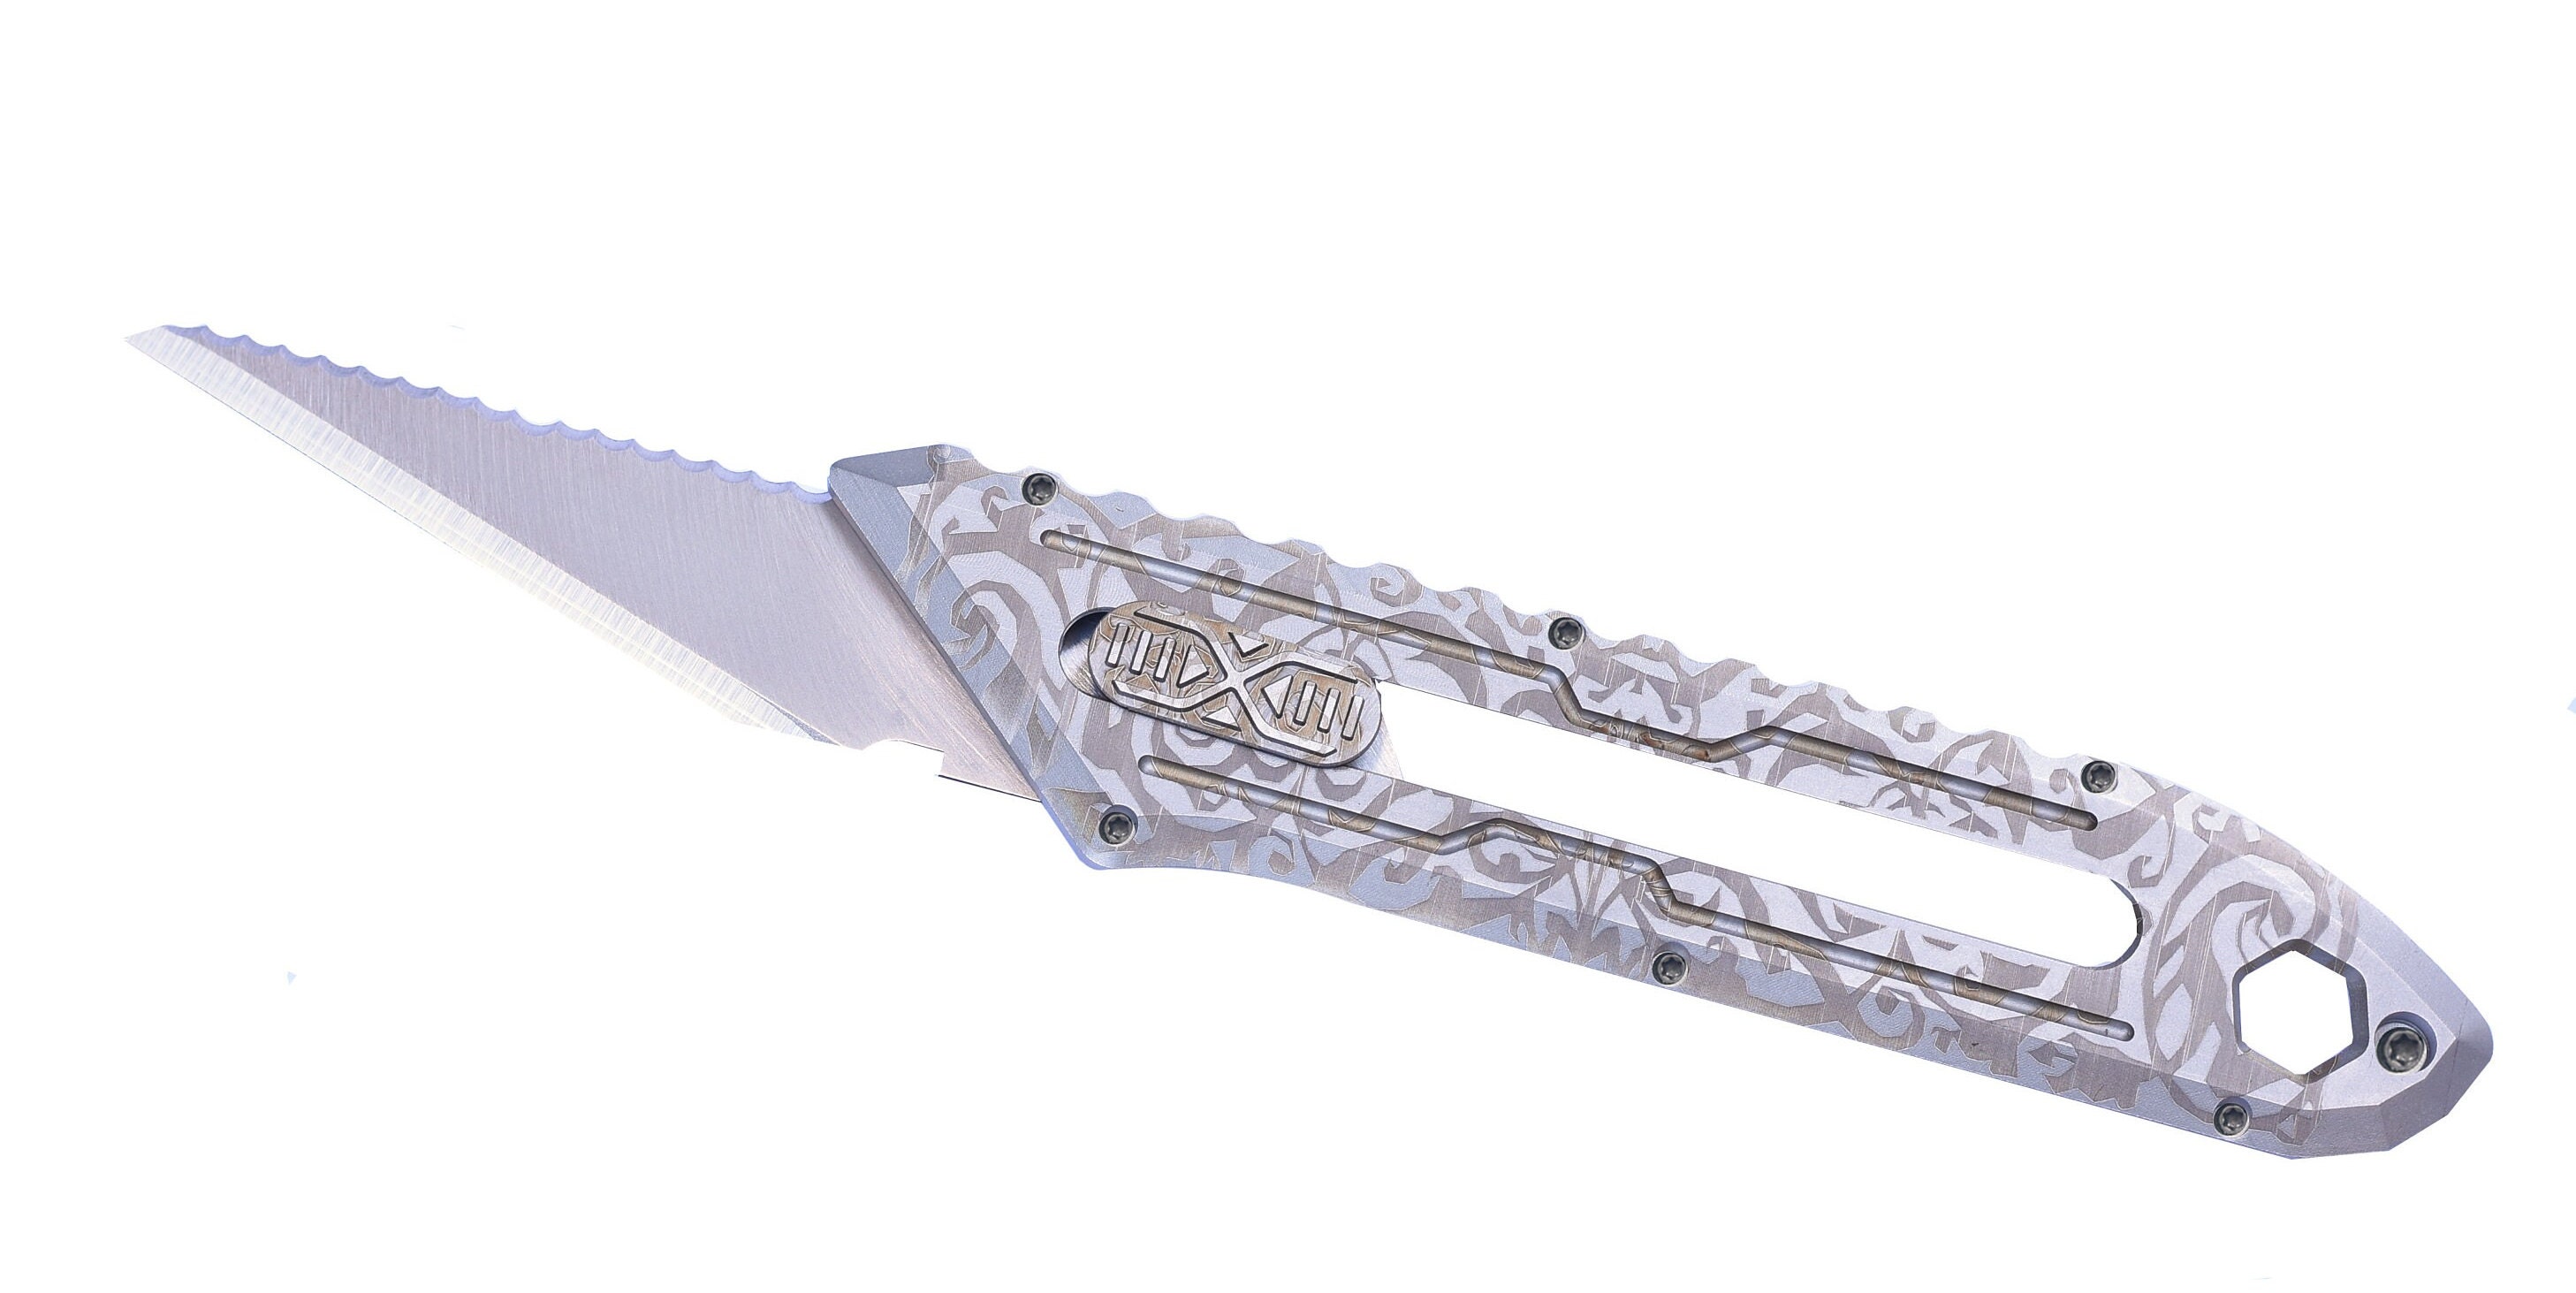 Xflip 316 Stainless Steel Utility Knife, Hobby Knife Fits Xacto Knife  Blades. Made in the USA 